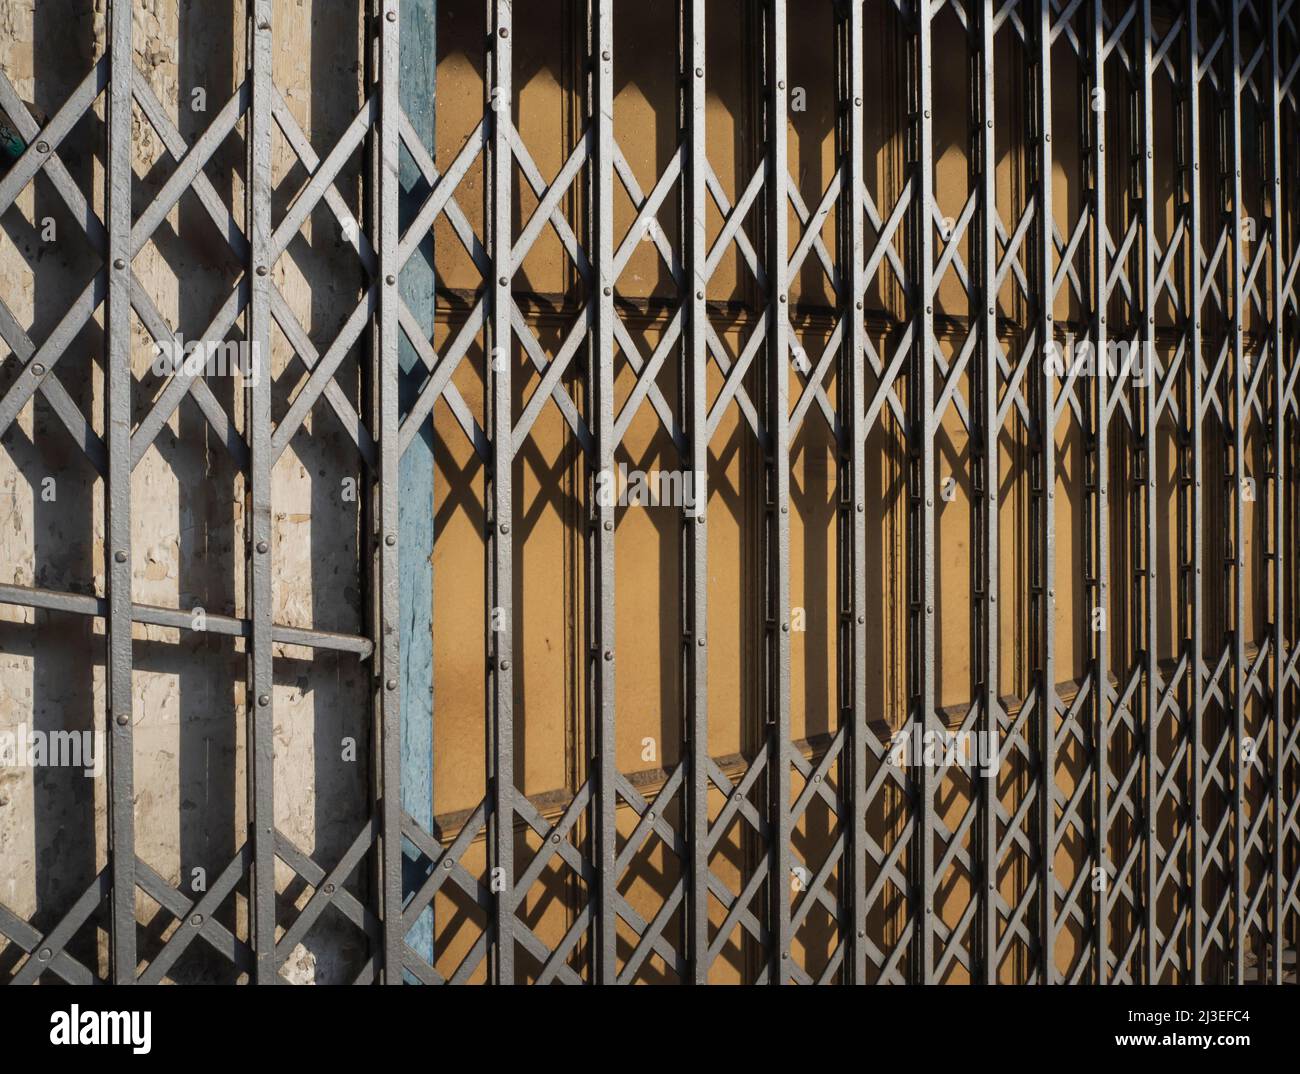 Grill Gate High Resolution Stock Photography and Images - Alamy